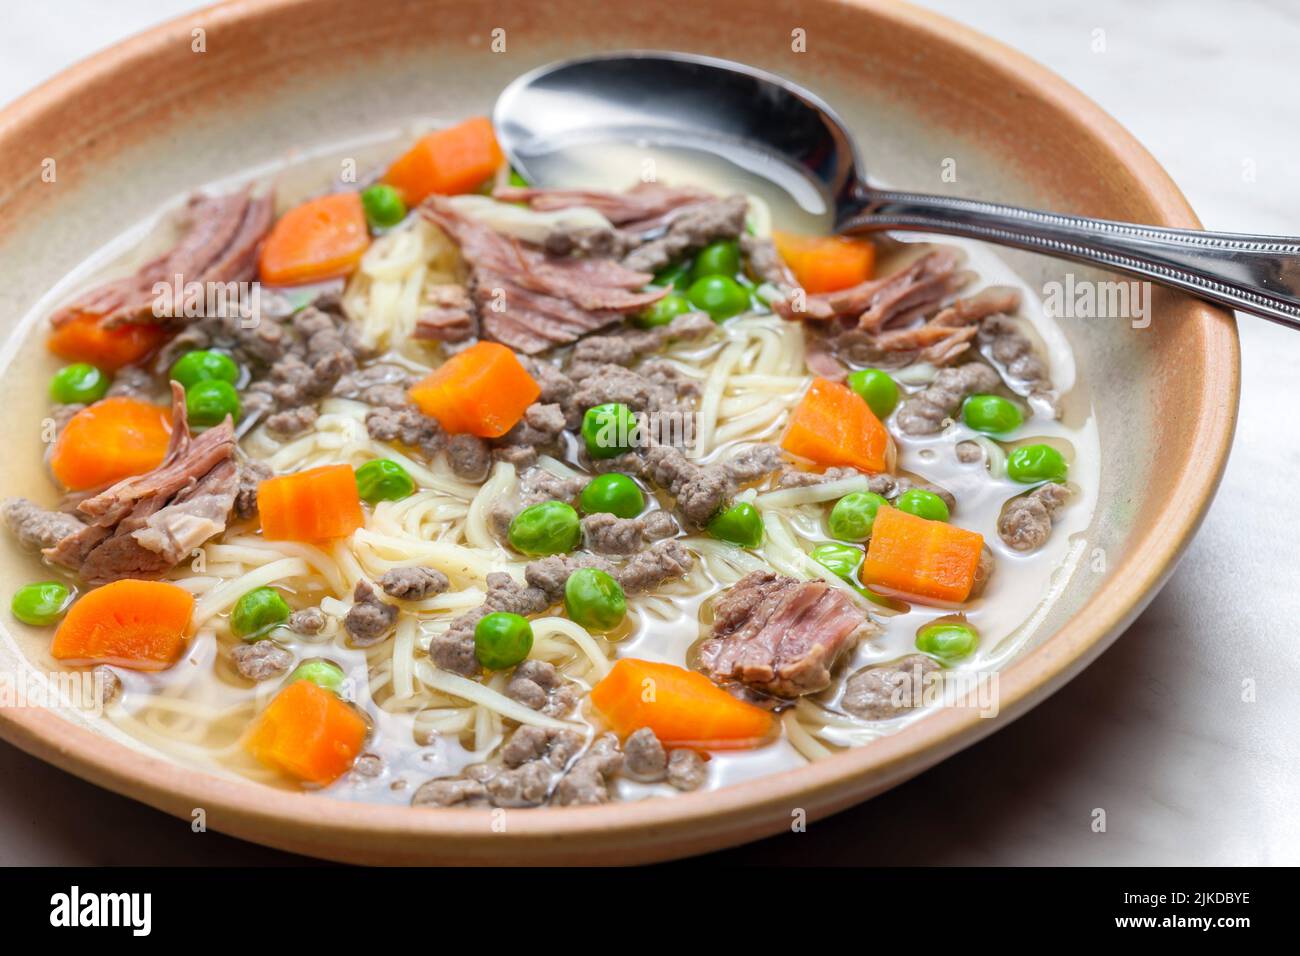 beef broth with green peas, carrot and small meatballs. Stock Photo